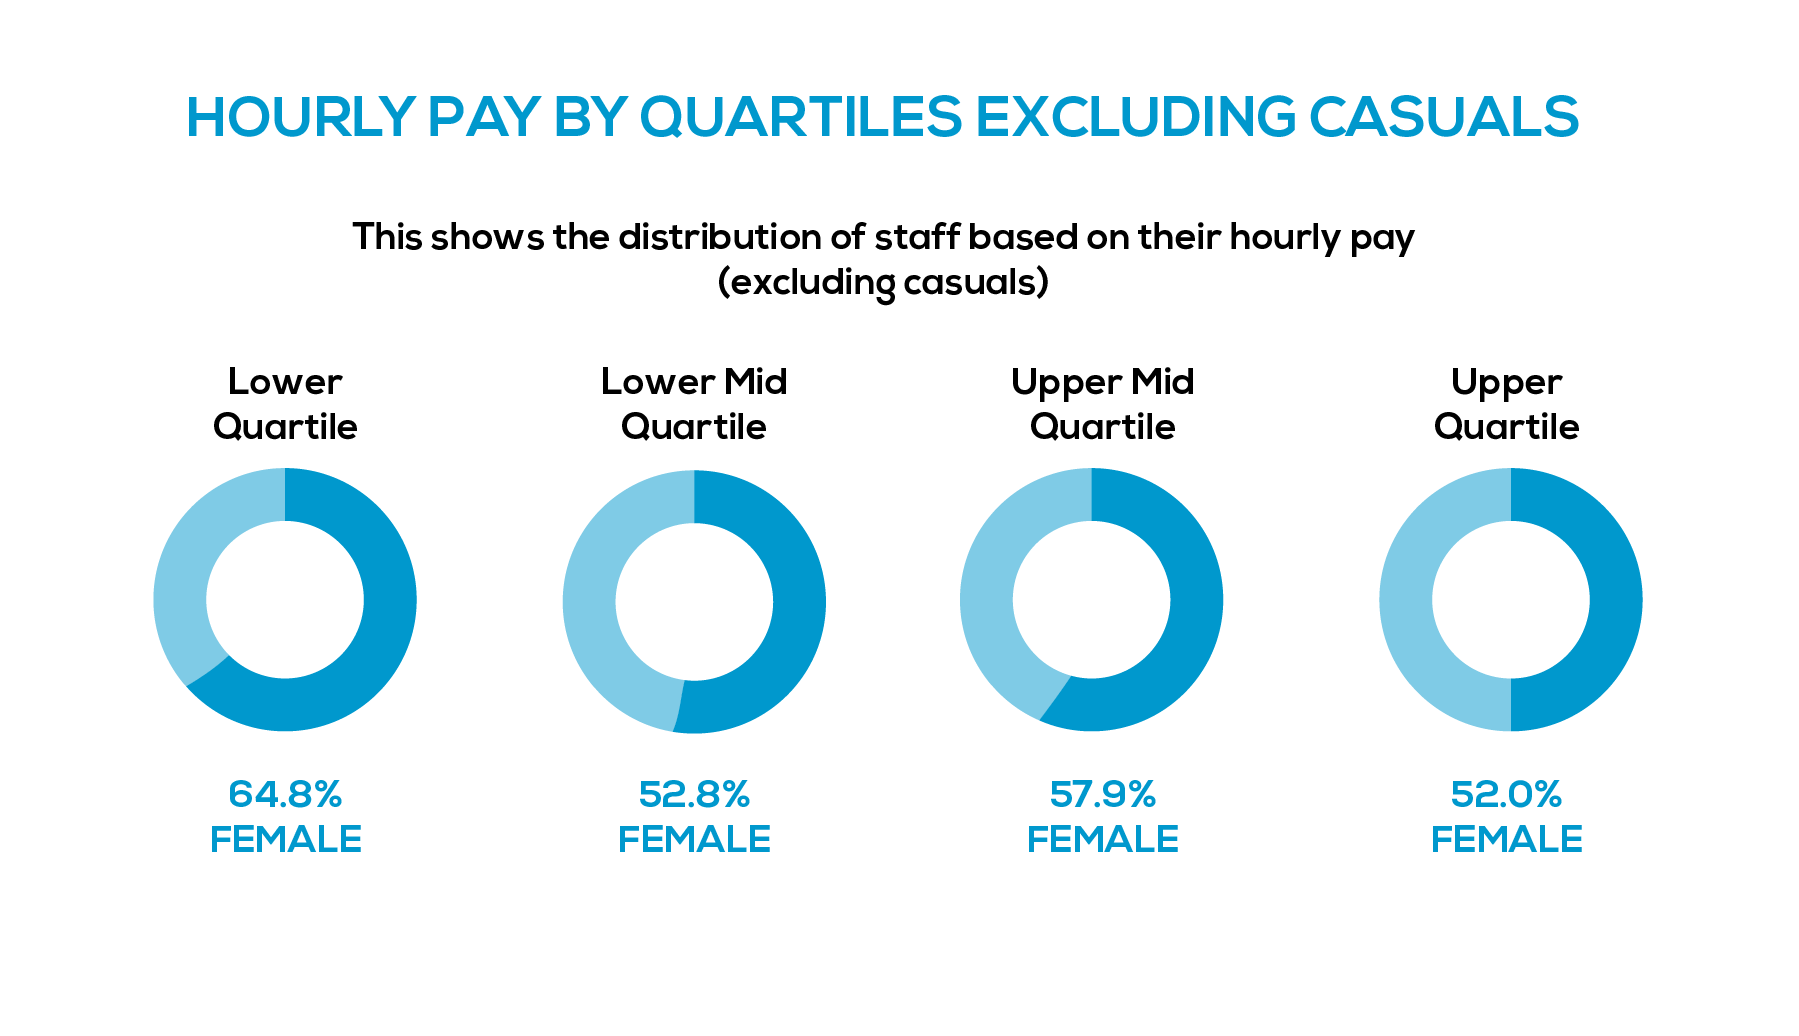 Hourly pay by quartile excluding casuals: Lower Quartile: 35.1 % Male; 64.9% Female. Lower Mid Quartile: 47.2% Male: 52.8% Female. Upper Mid Quartile: 42.1% Male. 57.9% Female. Upper Quartile: 48.0% Male; 52.0% Female.